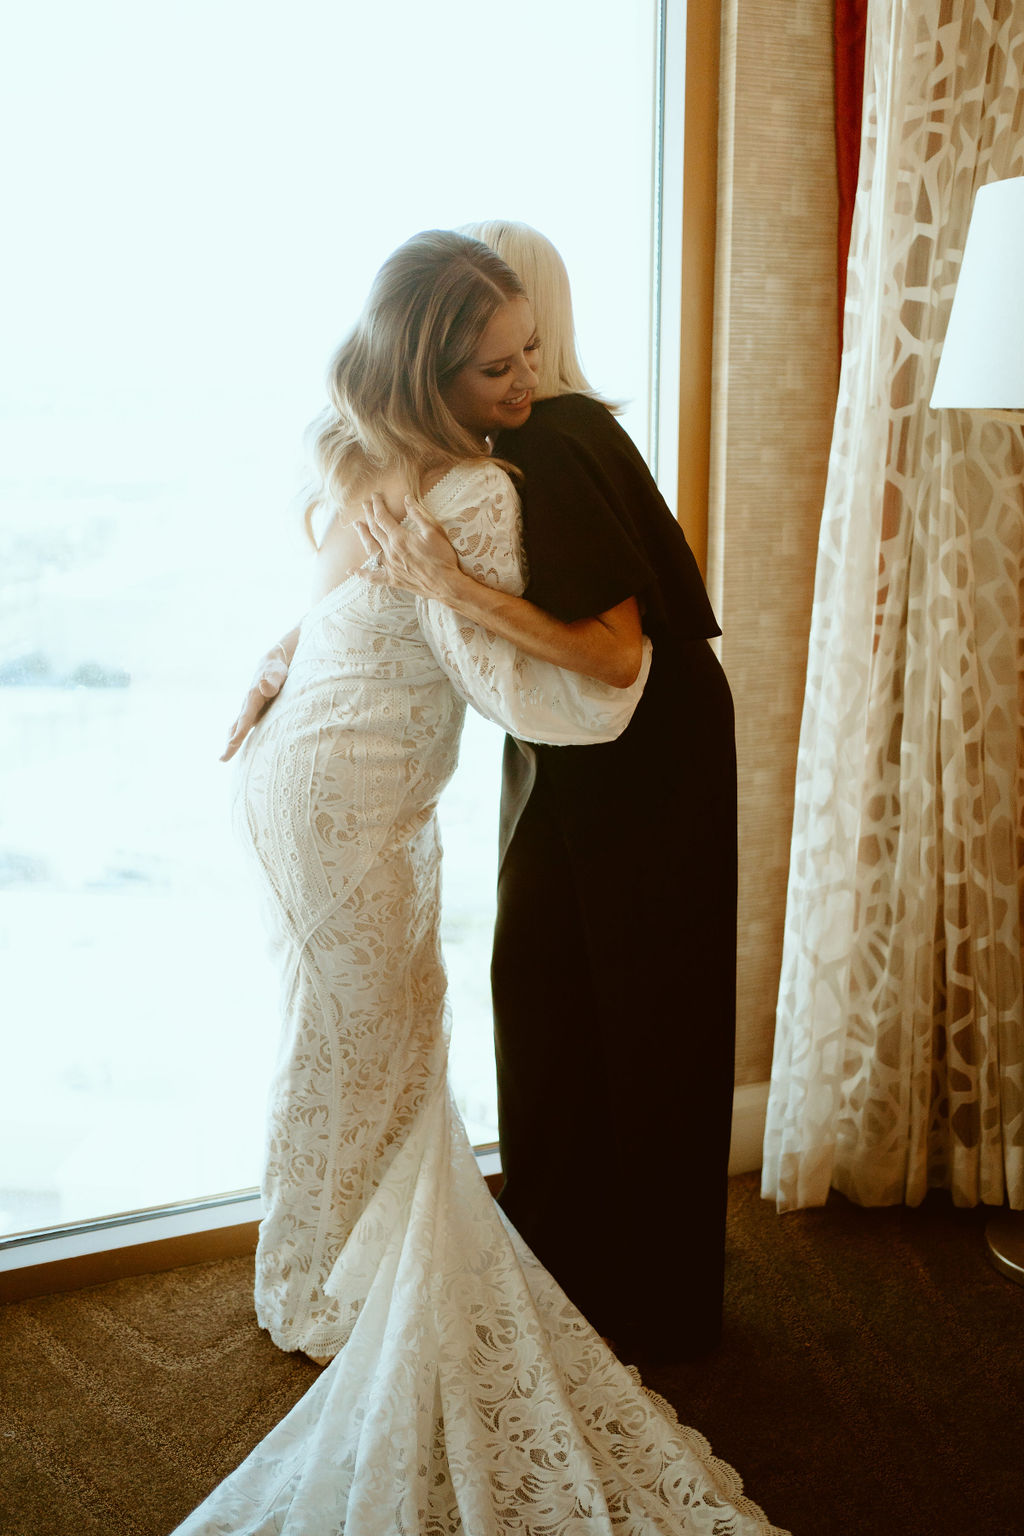 Rustic Boho Never Looked So Good! Bride and her mother embrace in a hug.